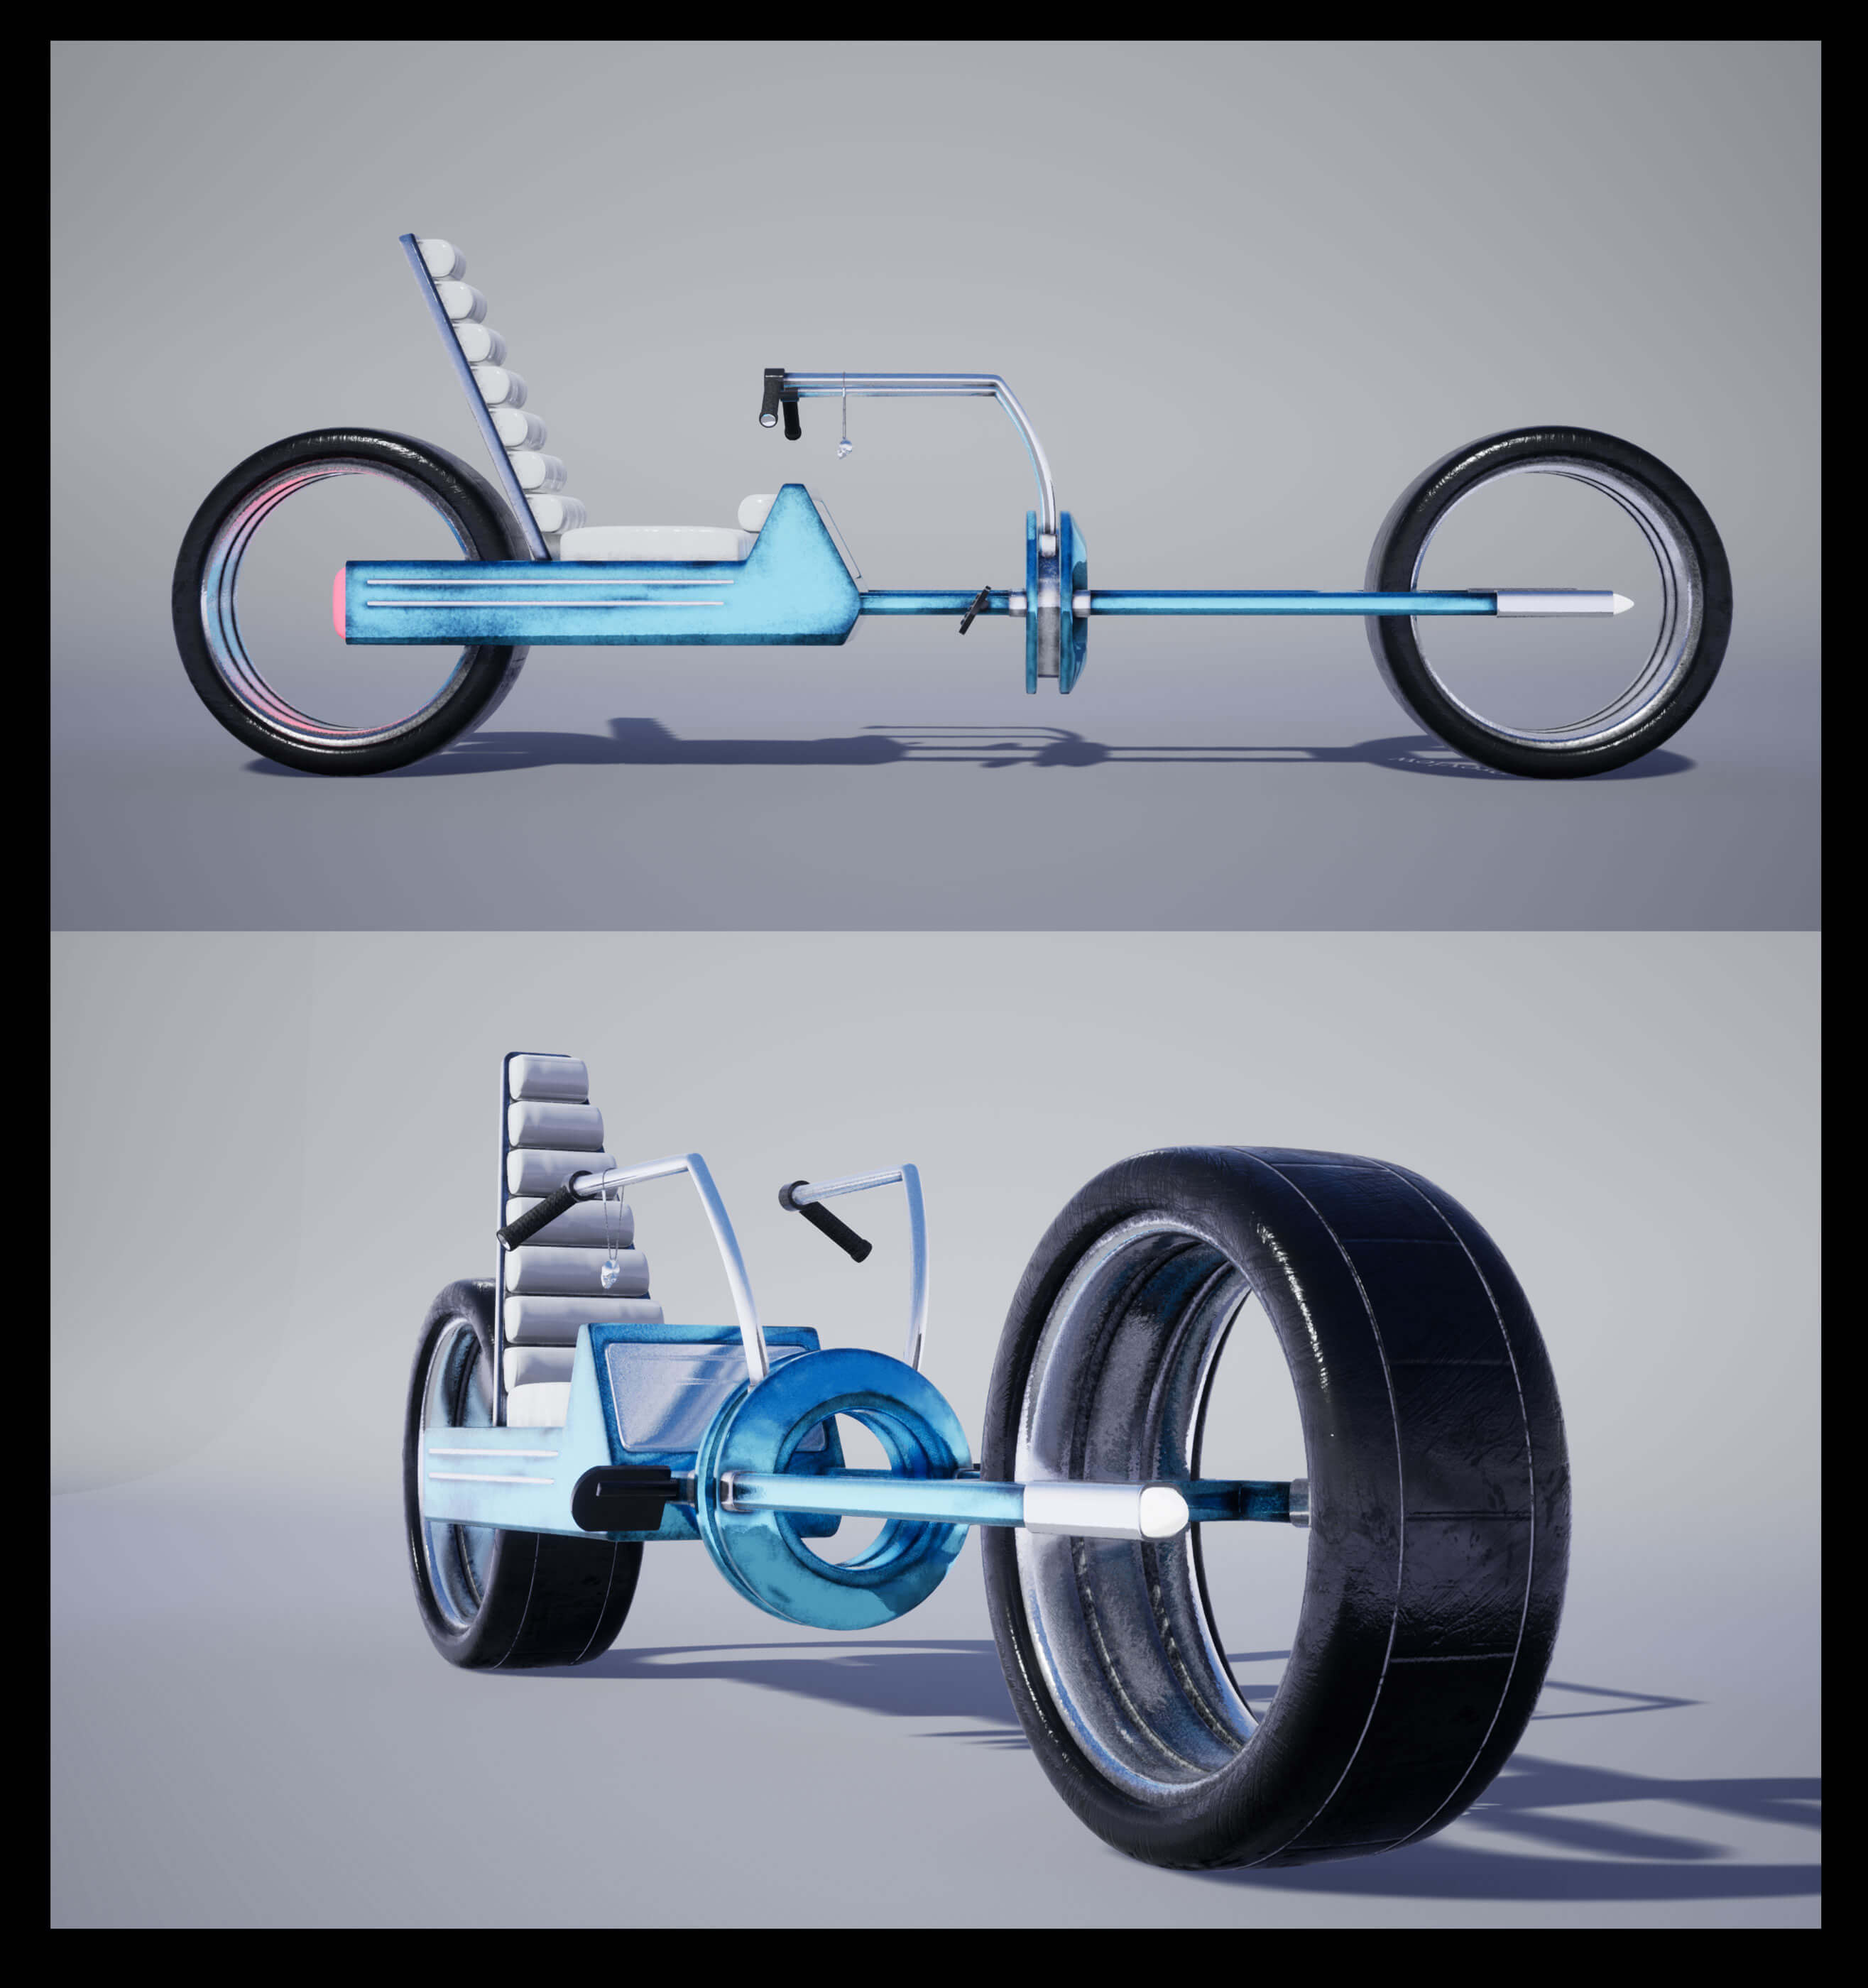 A futuristic bicycle vehicle with floating wheels.